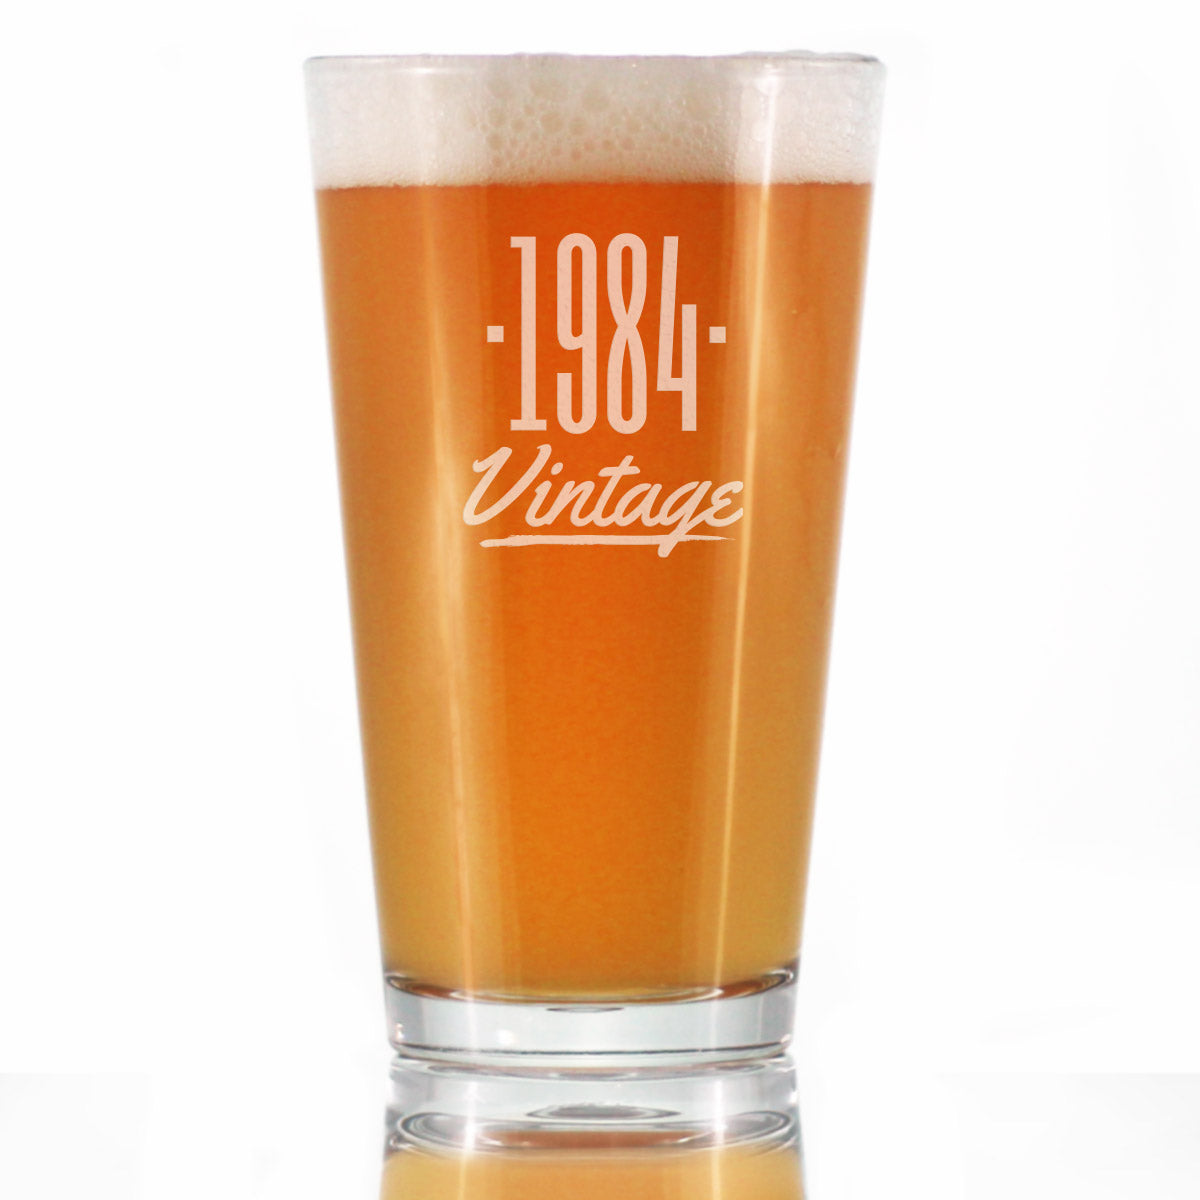 Vintage 1984 - Pint Glass for Beer - 39th Birthday Gifts for Men or Women Turning 39 - Fun Bday Party Decor - 16 oz